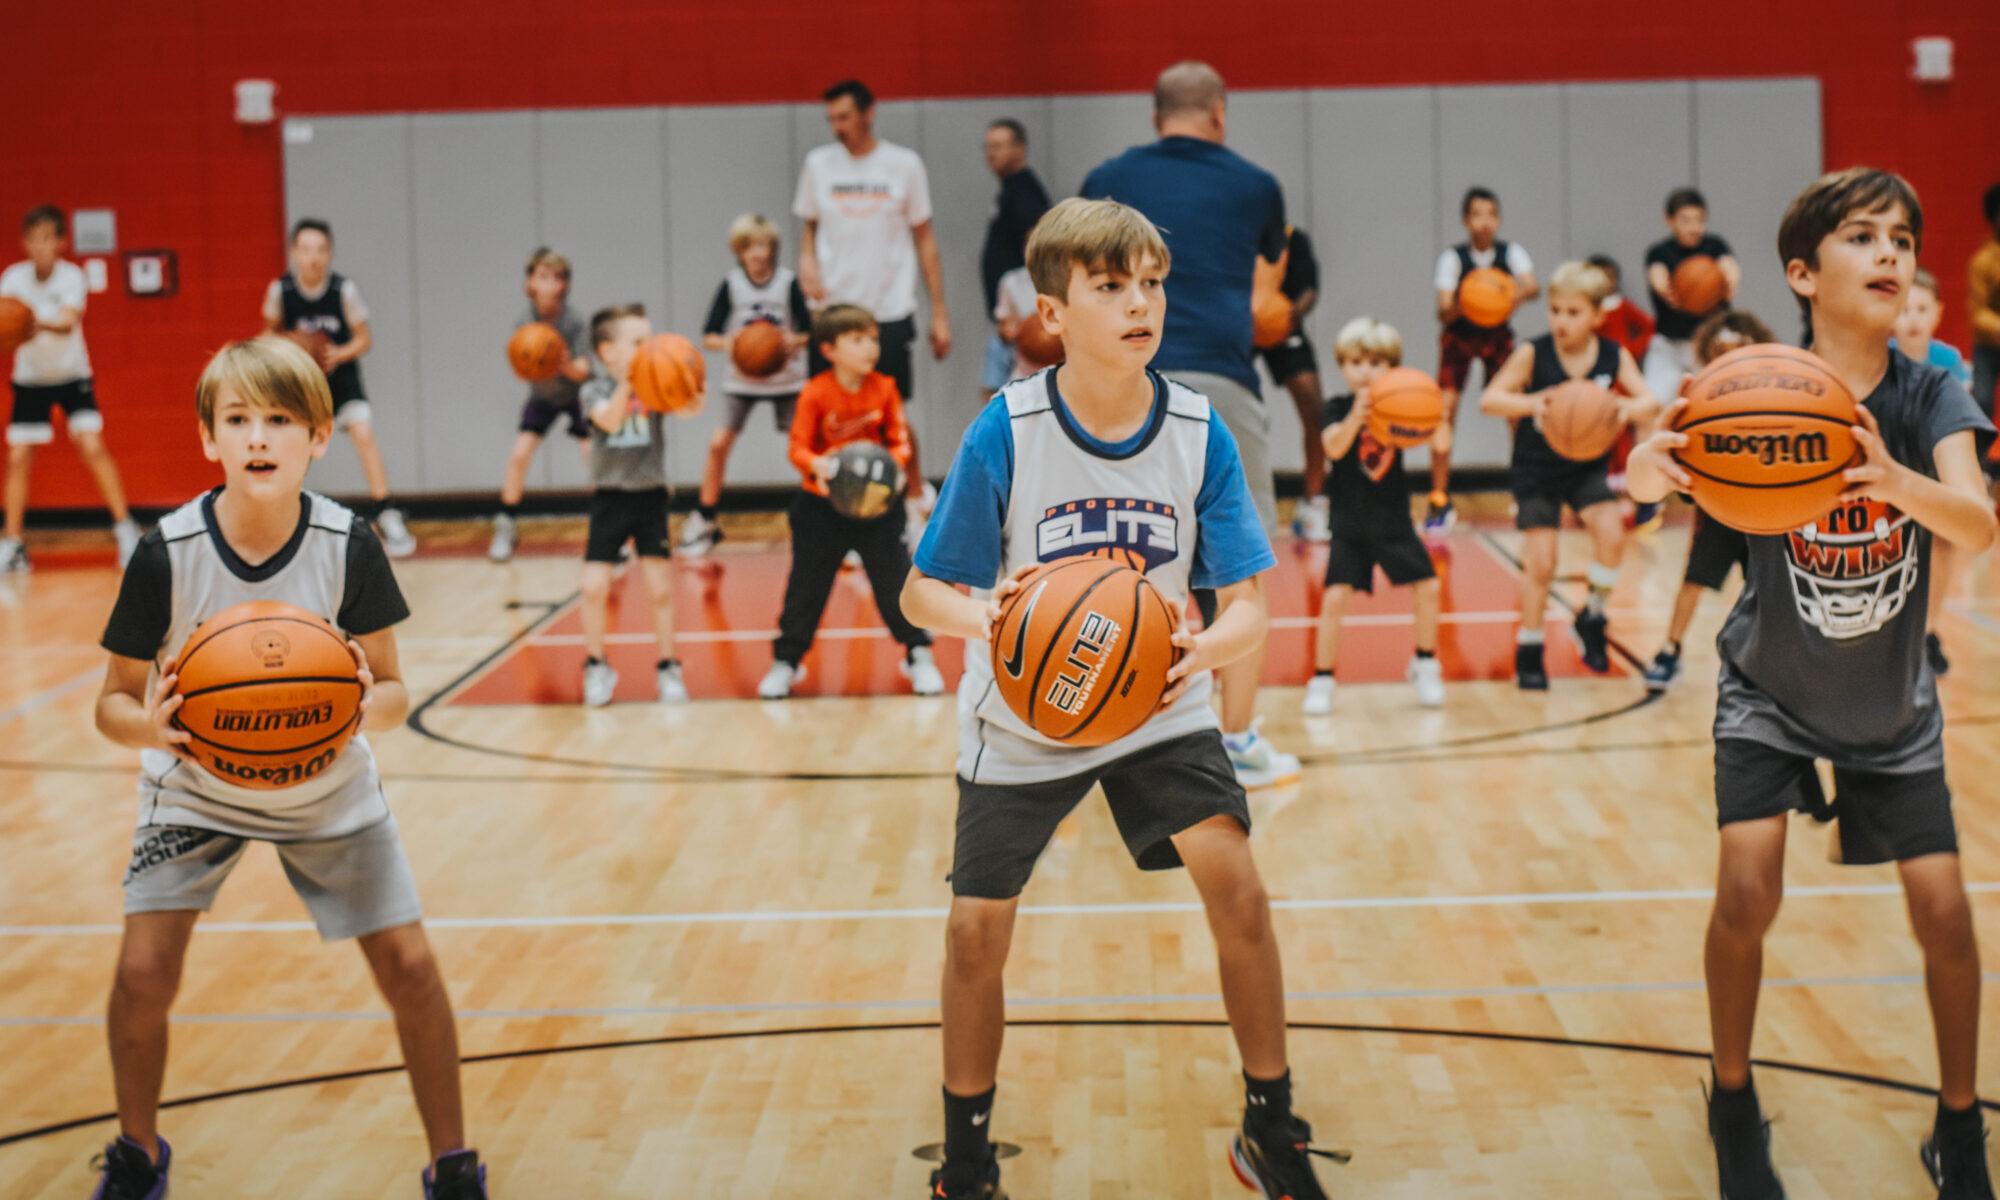 Three young athletes practicing at Elite Hoops Academy™ weekly Skills & Drills session, focused and engaged in basketball training.